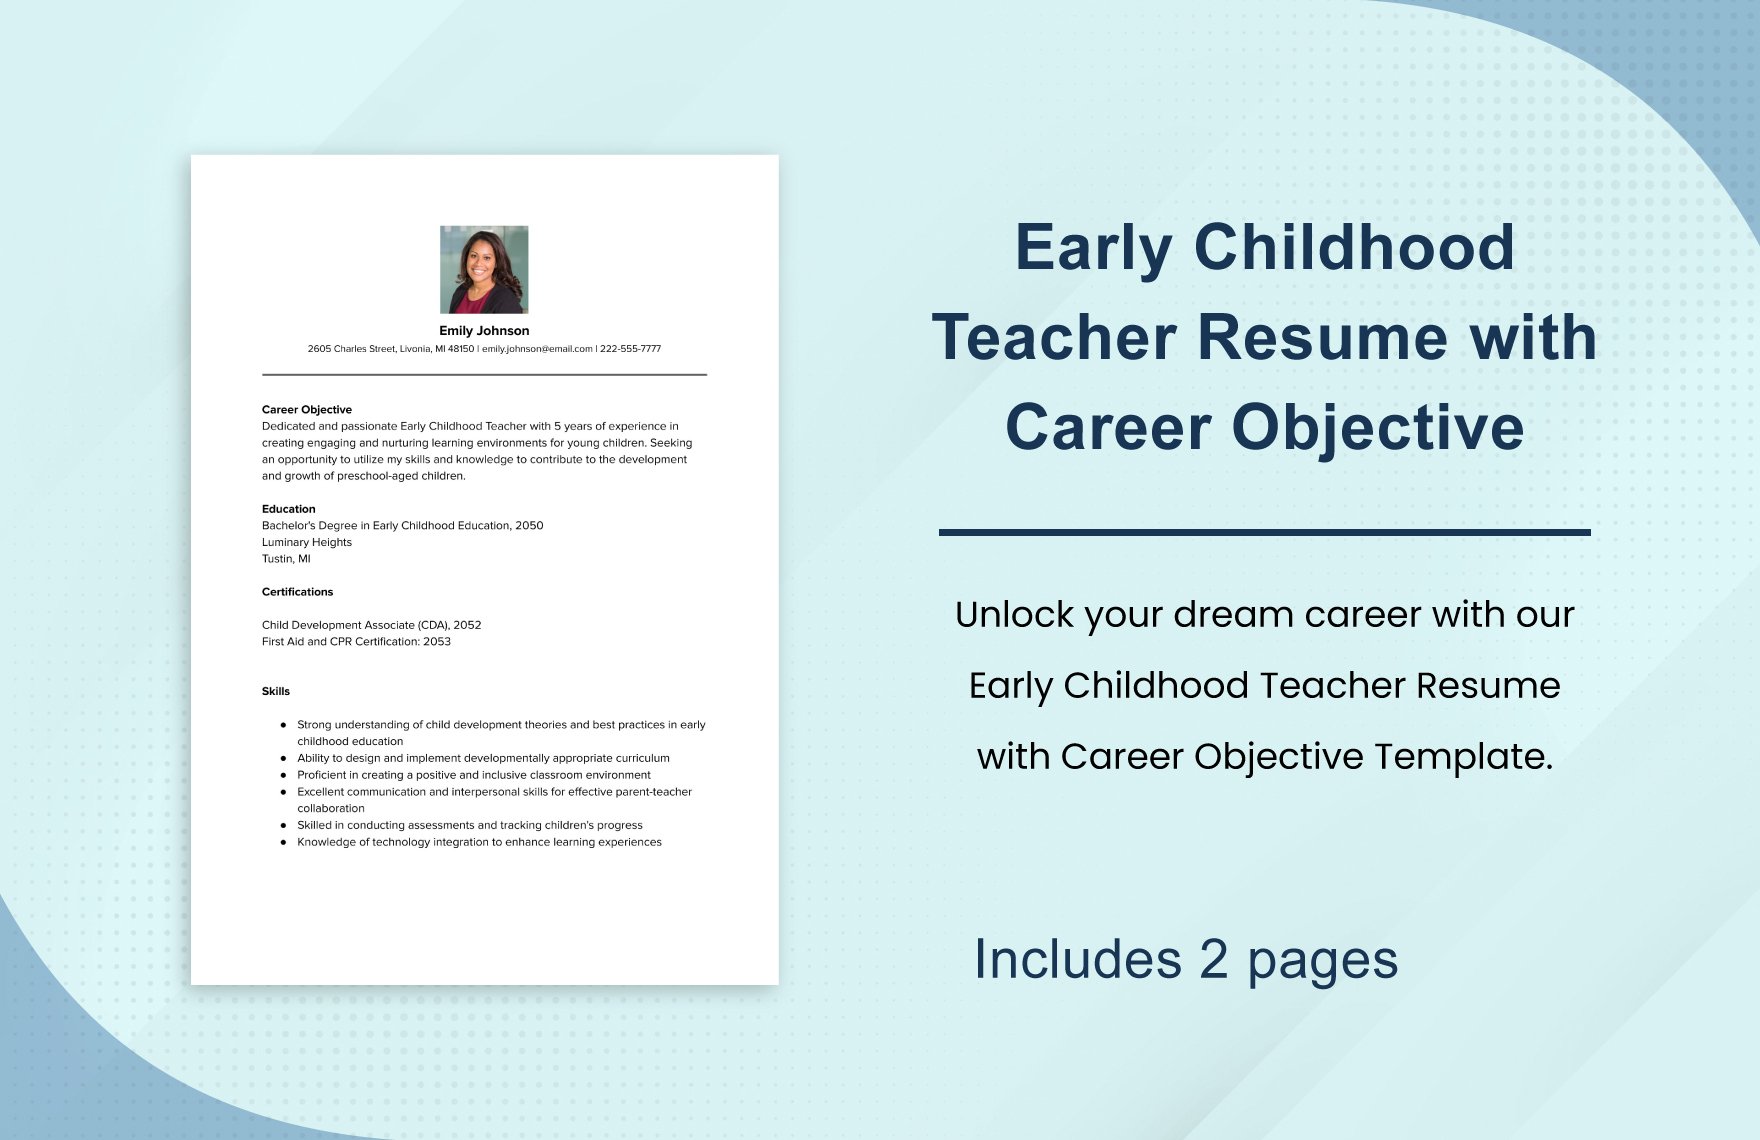 Early Childhood Teacher Resume with Career Objective